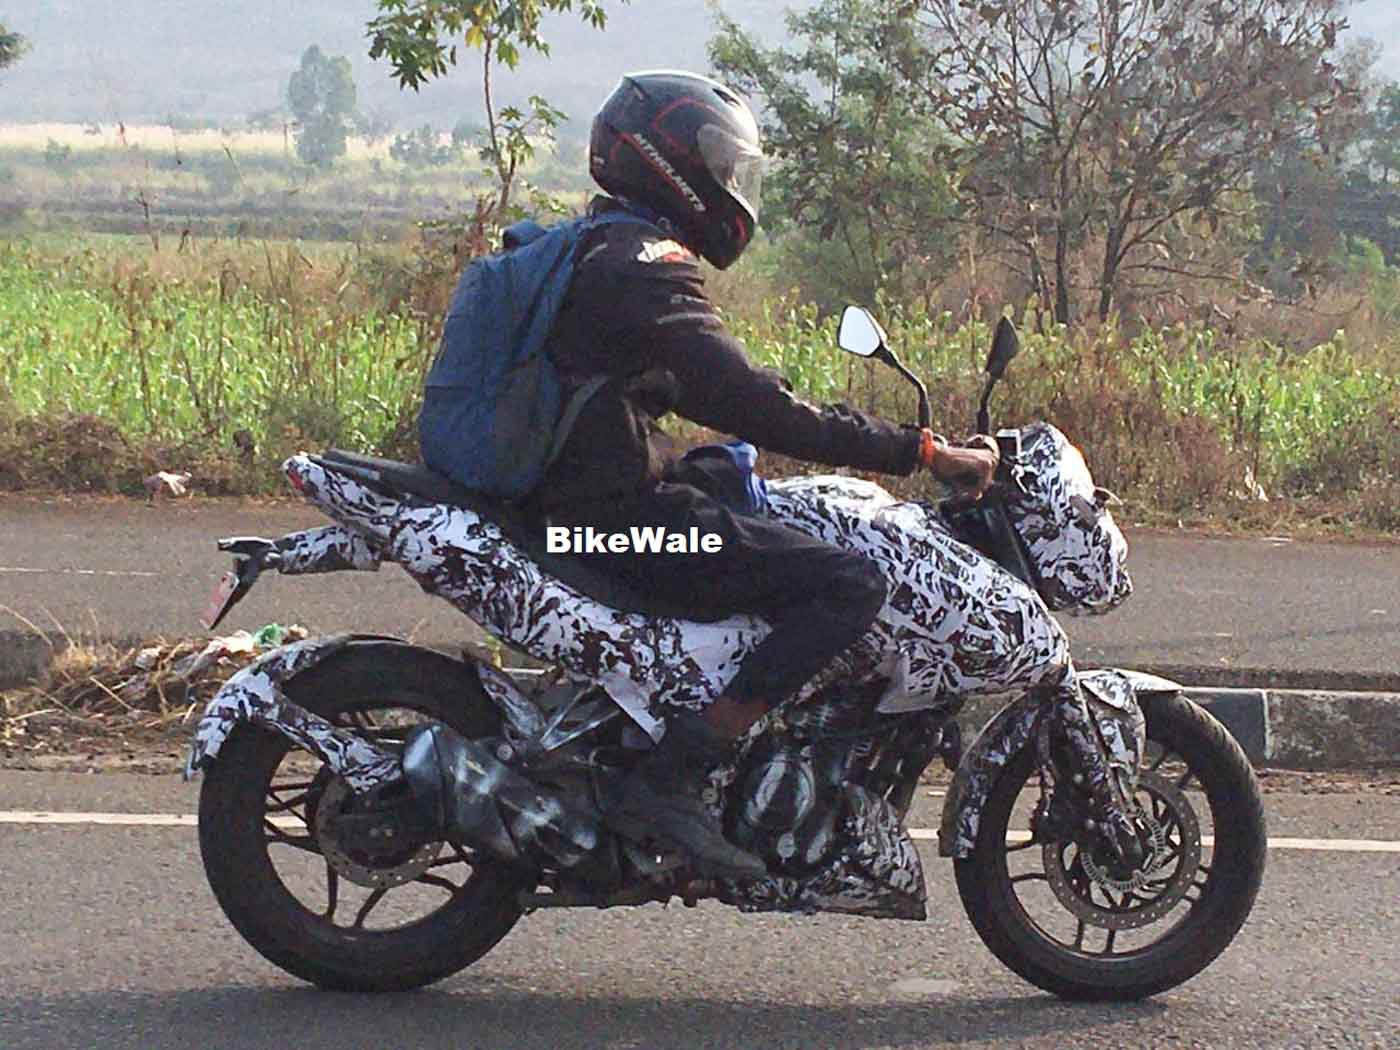 Top 5 Things Expected From The Upcoming Bajaj Pulsar 250